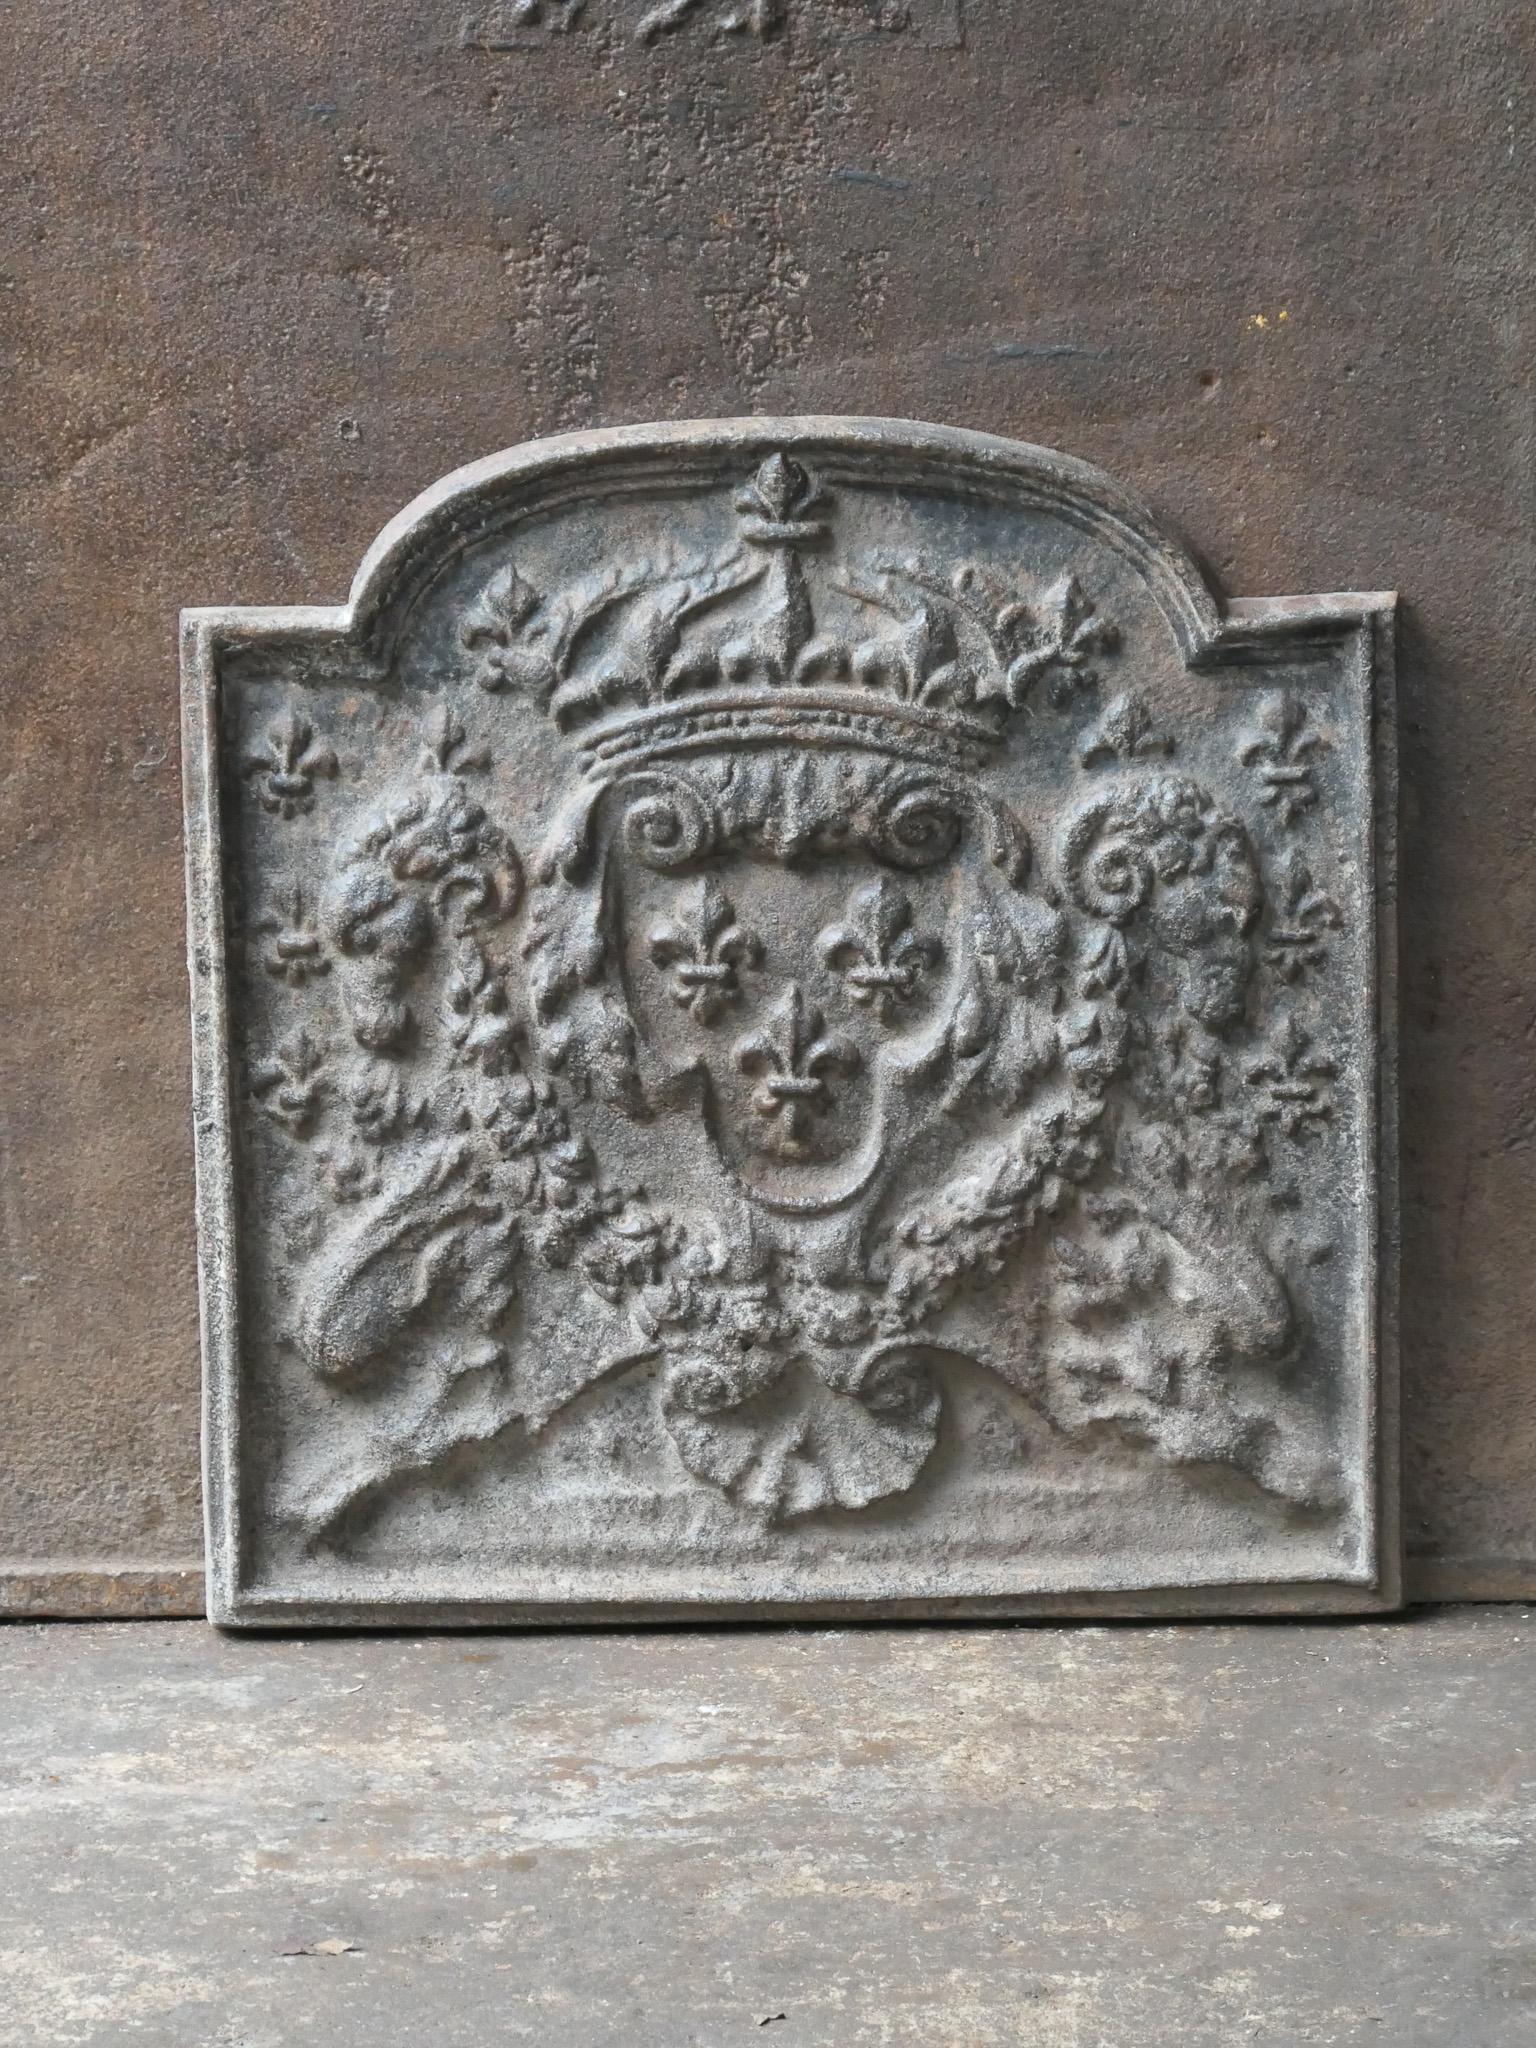 20th century French Louis XIV style fireback with the Arms of France. A coat of arms of the House of Bourbon, an originally French royal house that became a major dynasty in Europe. The house delivered kings for Spain (Navarra), France, both